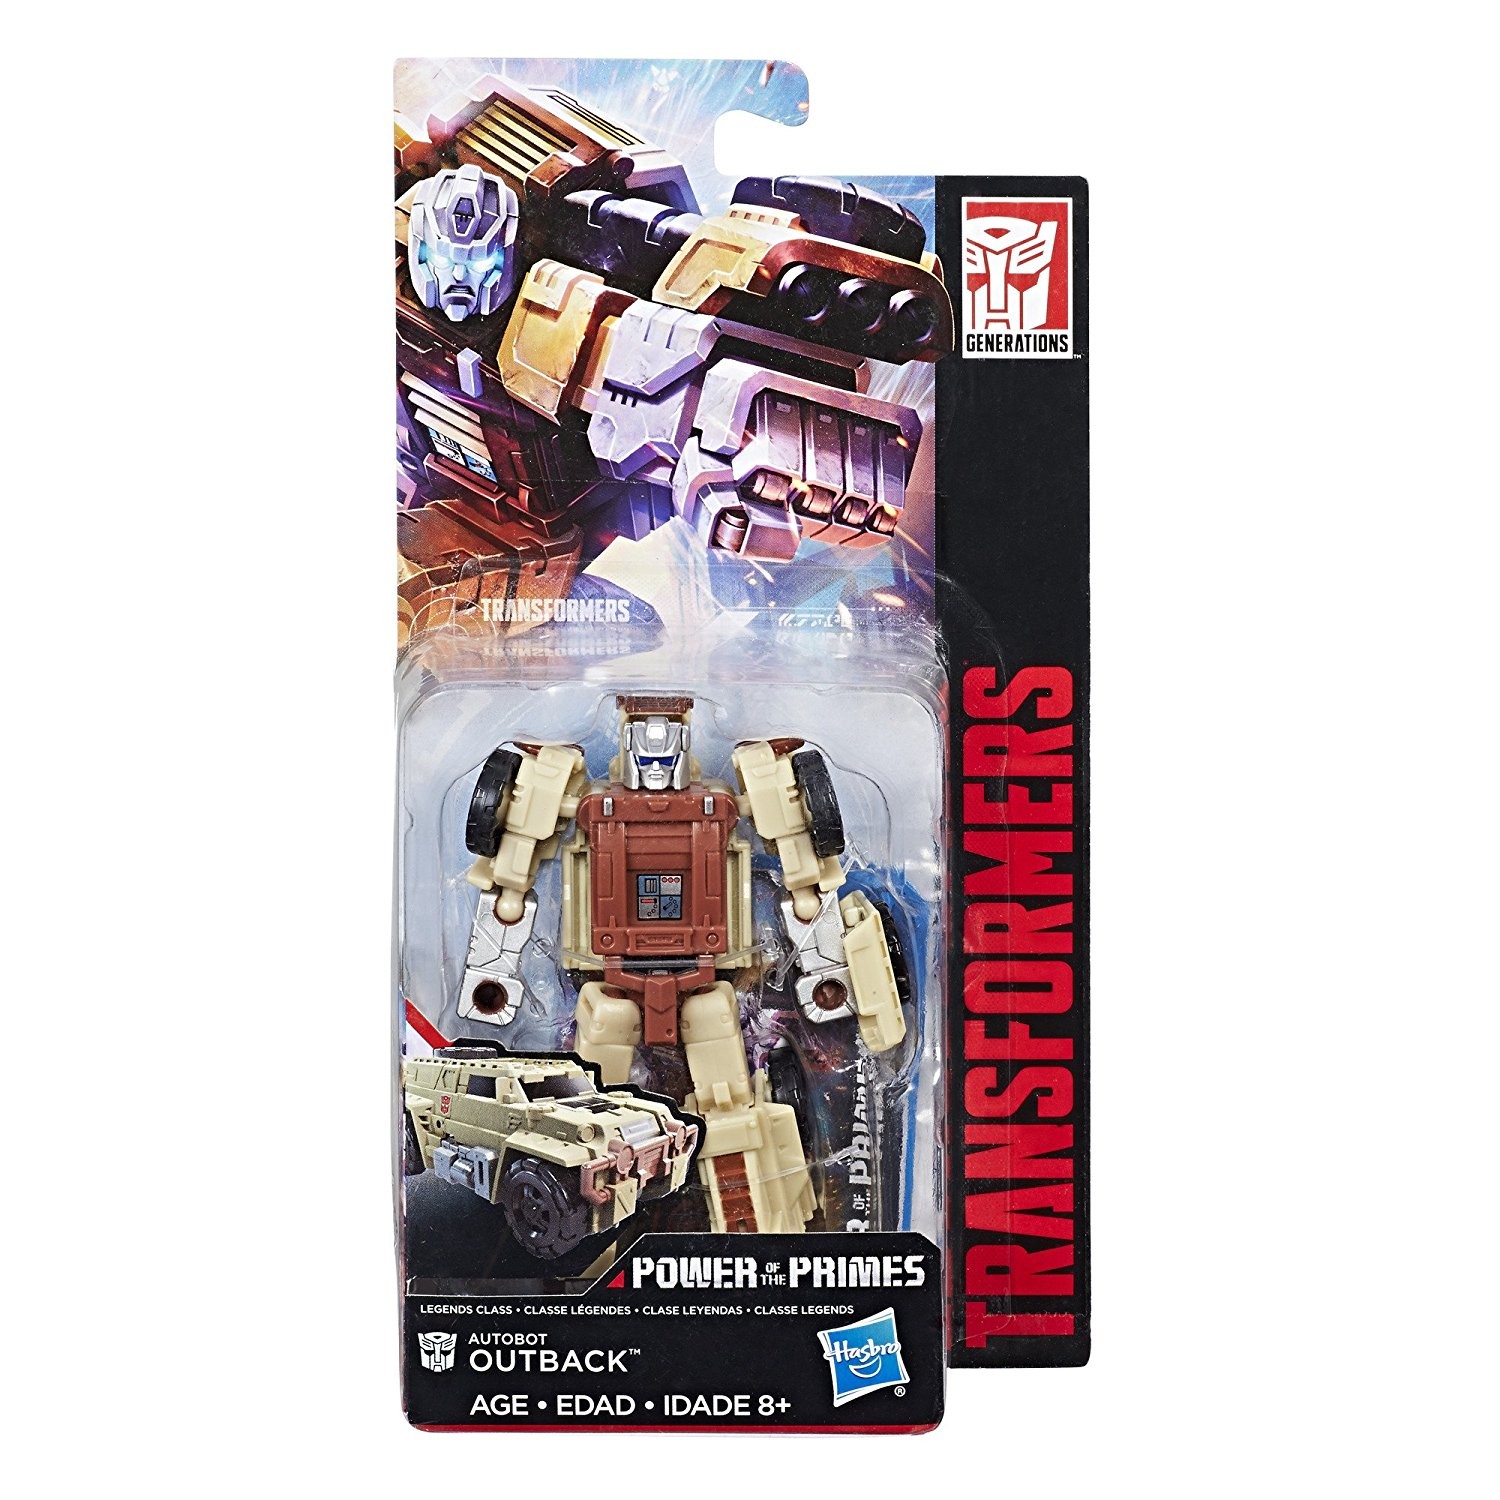 Transformers News: Transformers Power of the Primes Autobot Outback and Cindersaur Listed Online!